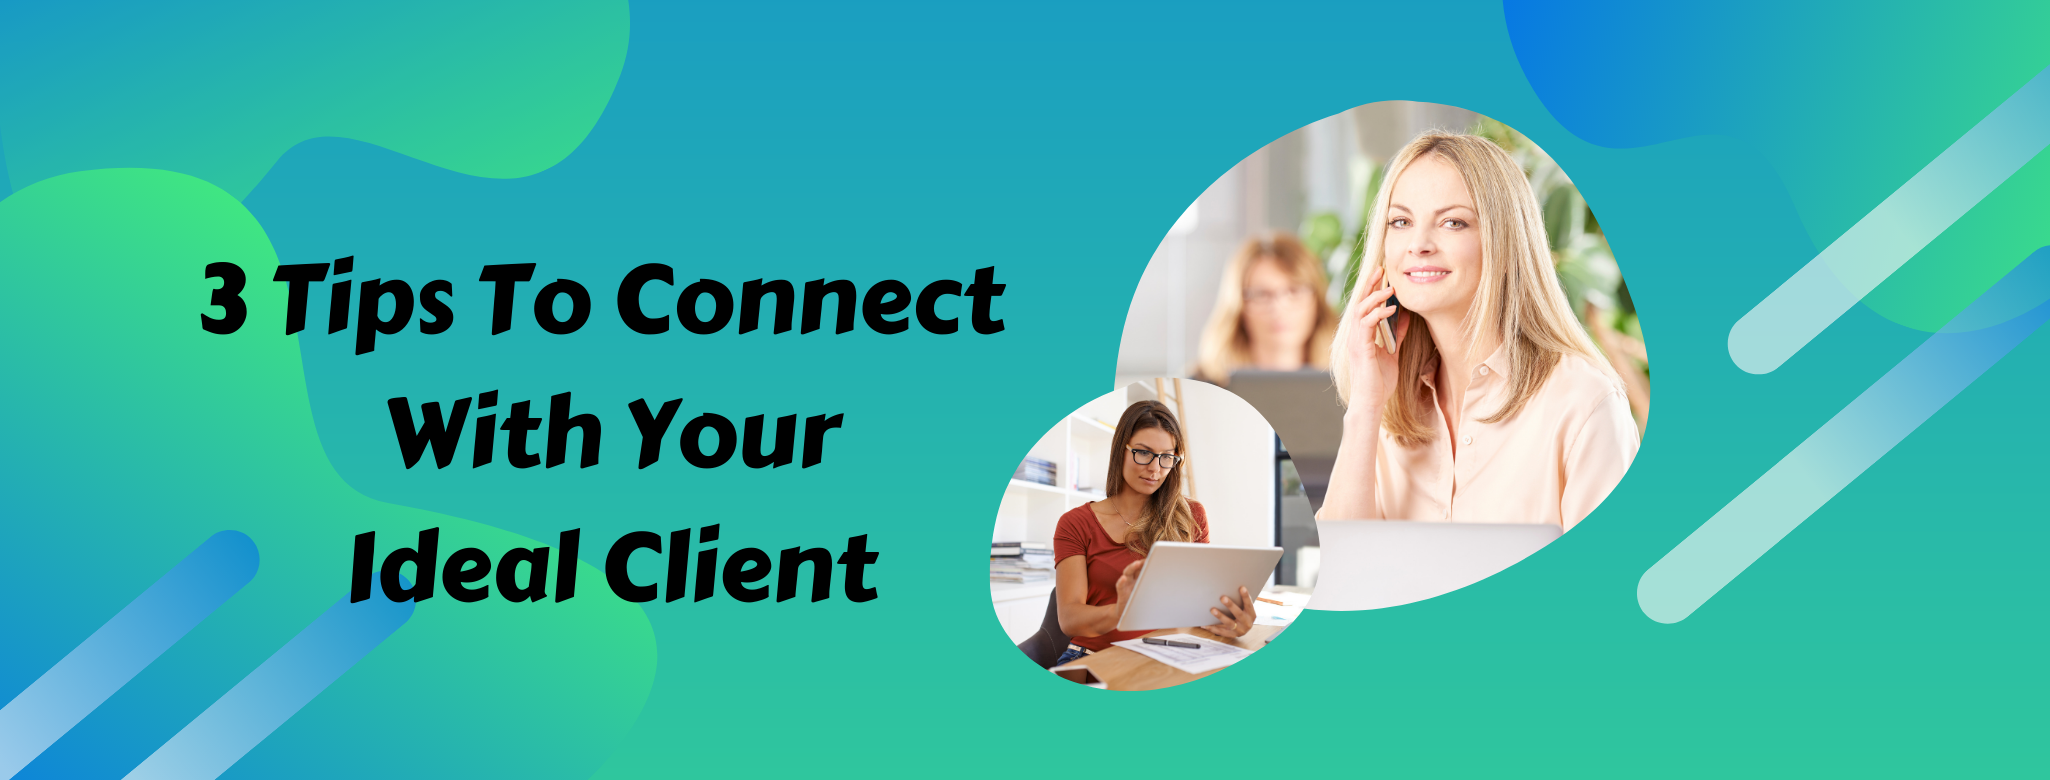 connect to your ideal client